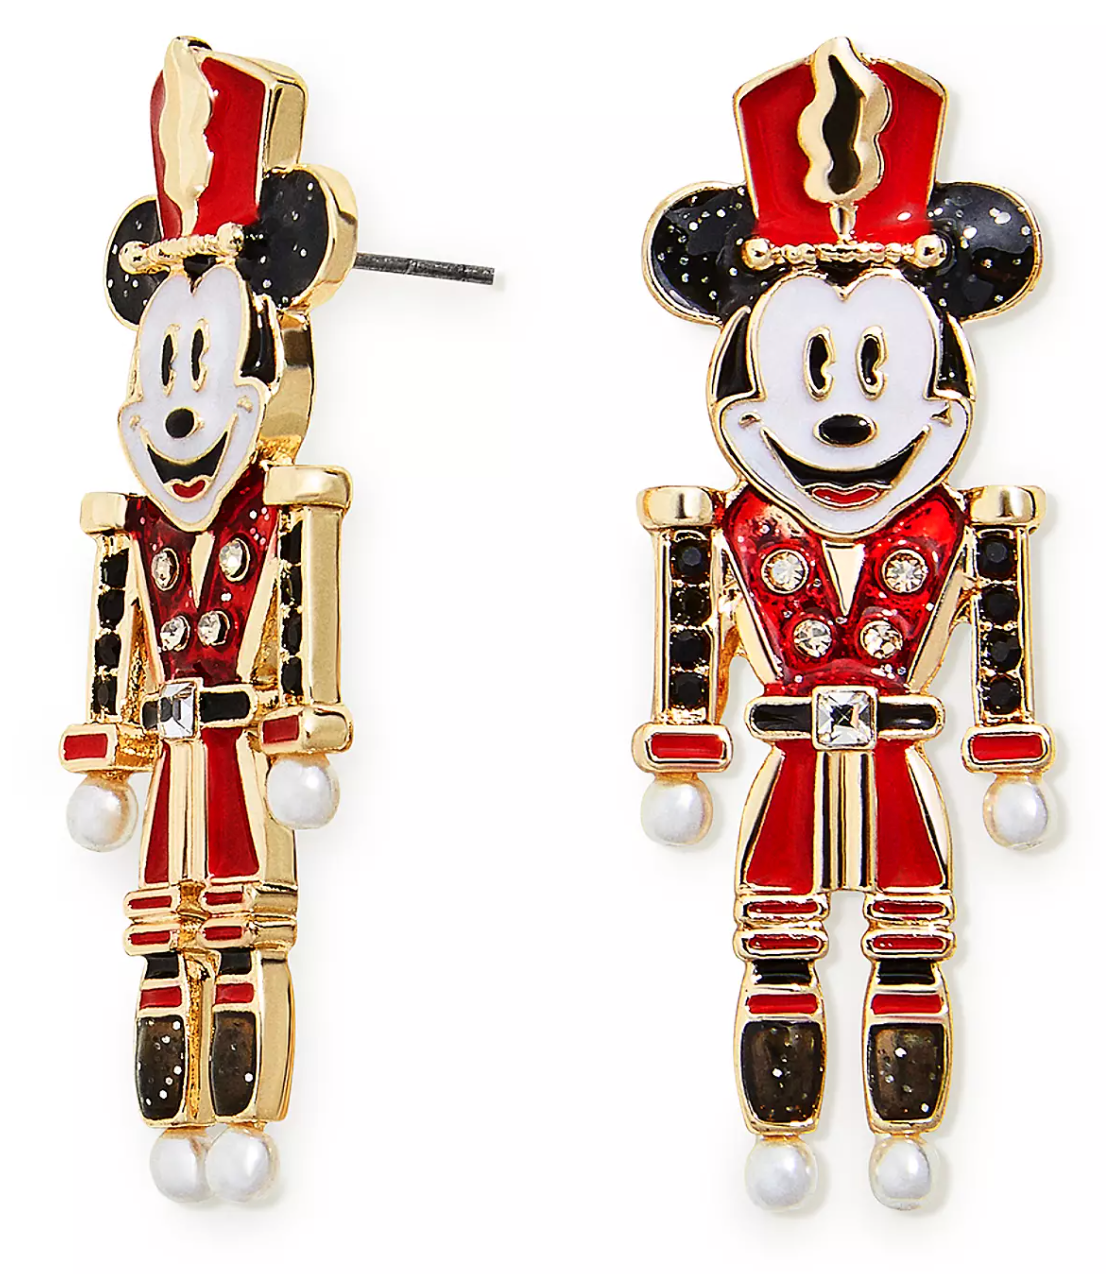 The NEW Disney x BaubleBar Jewelry Would Make Whimsical Christmas Presents!